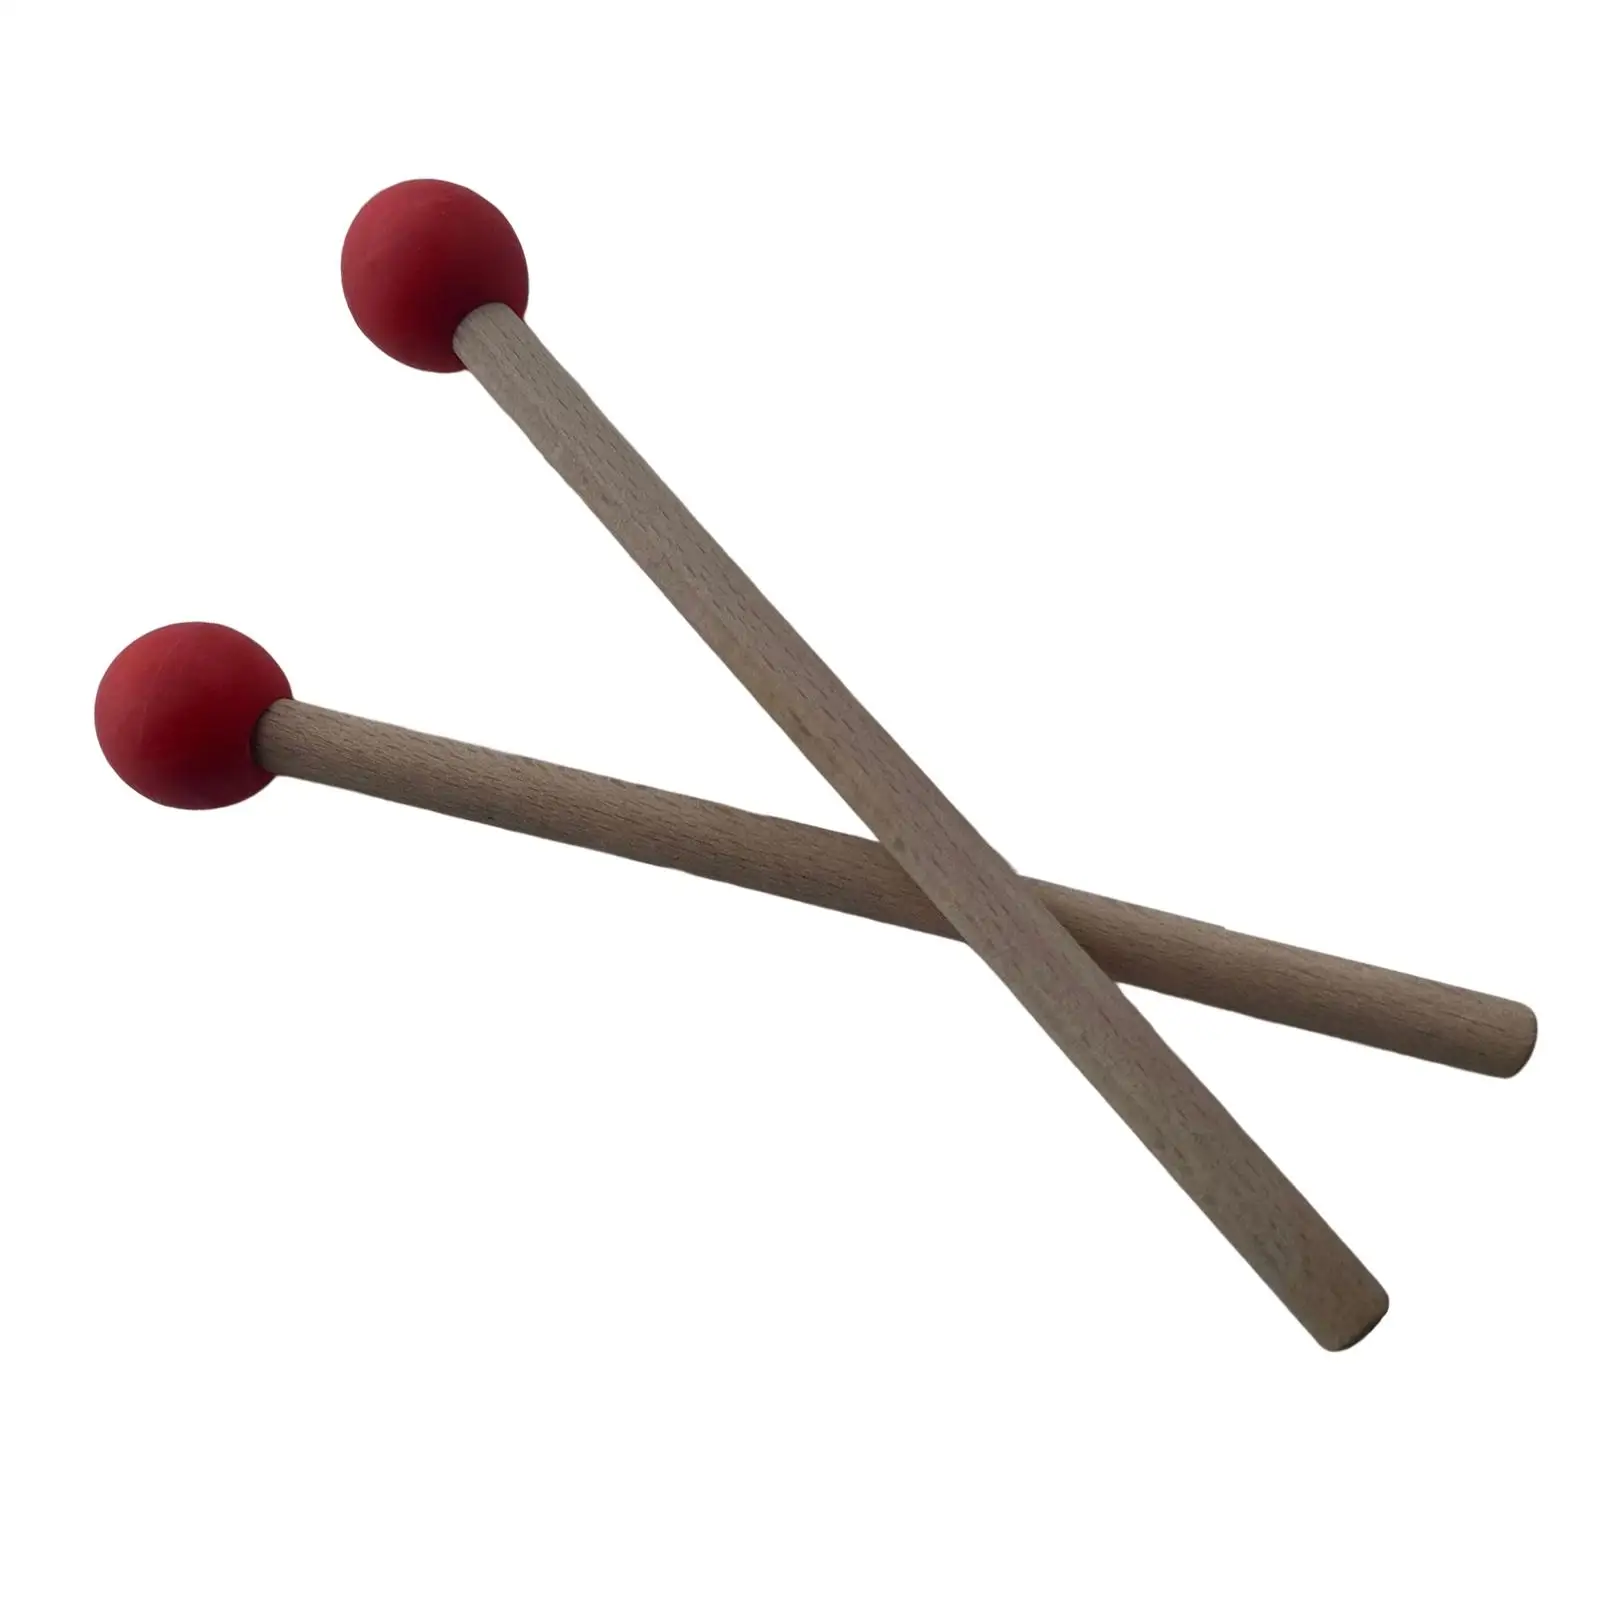 2 Pieces Rubber drum Mallet with Wooden Handle Percussion Xylophone Bell Mallets